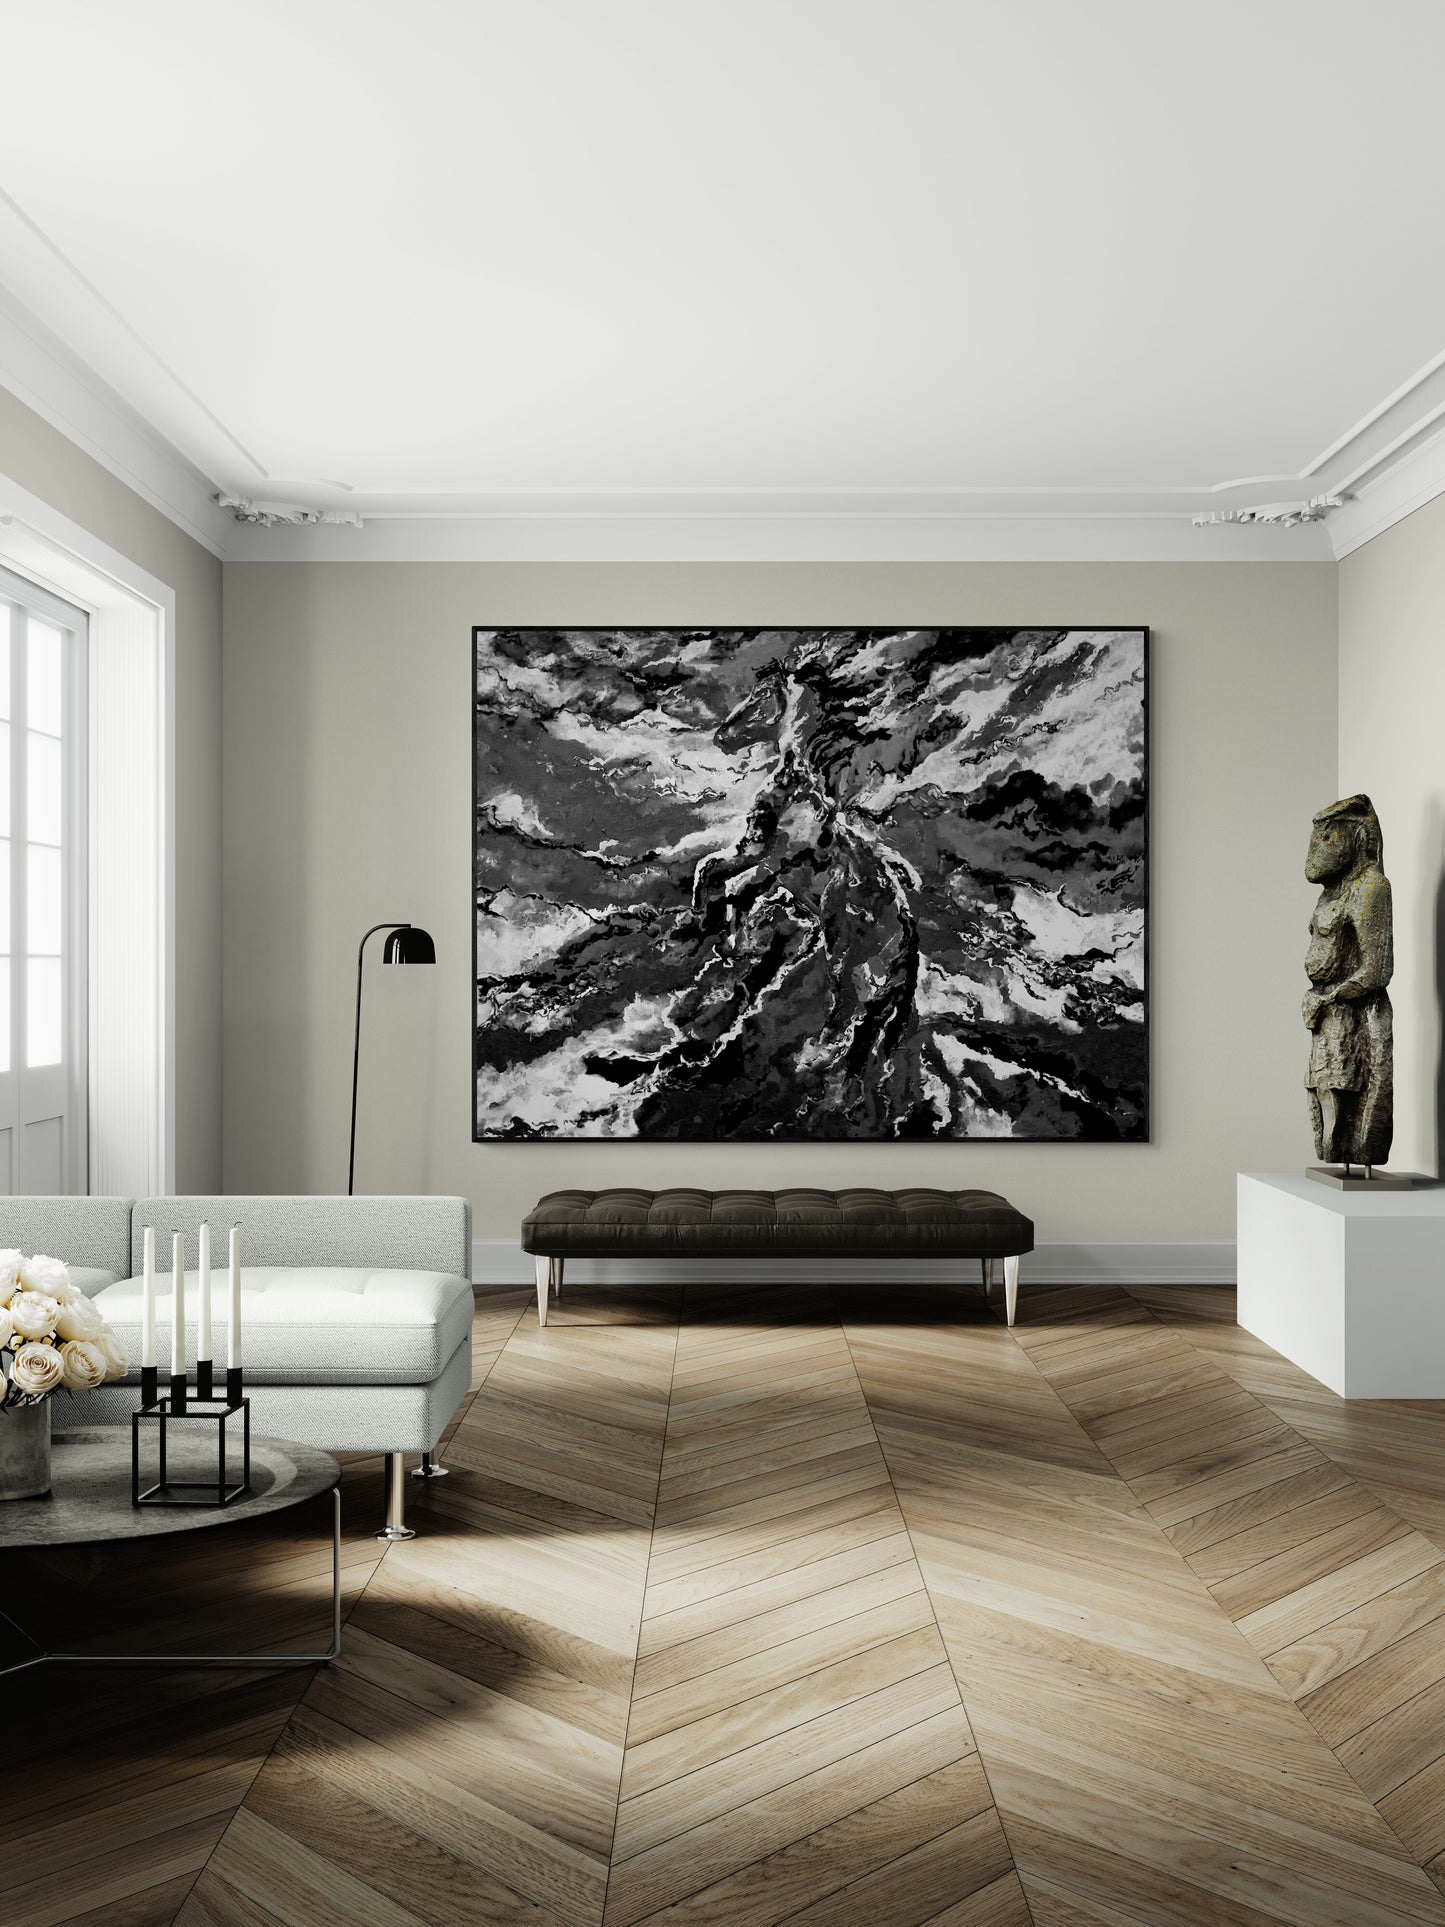 CANVAS PRINT abstract horse in clouds black and white with artistic finish wall art Scandinavian style